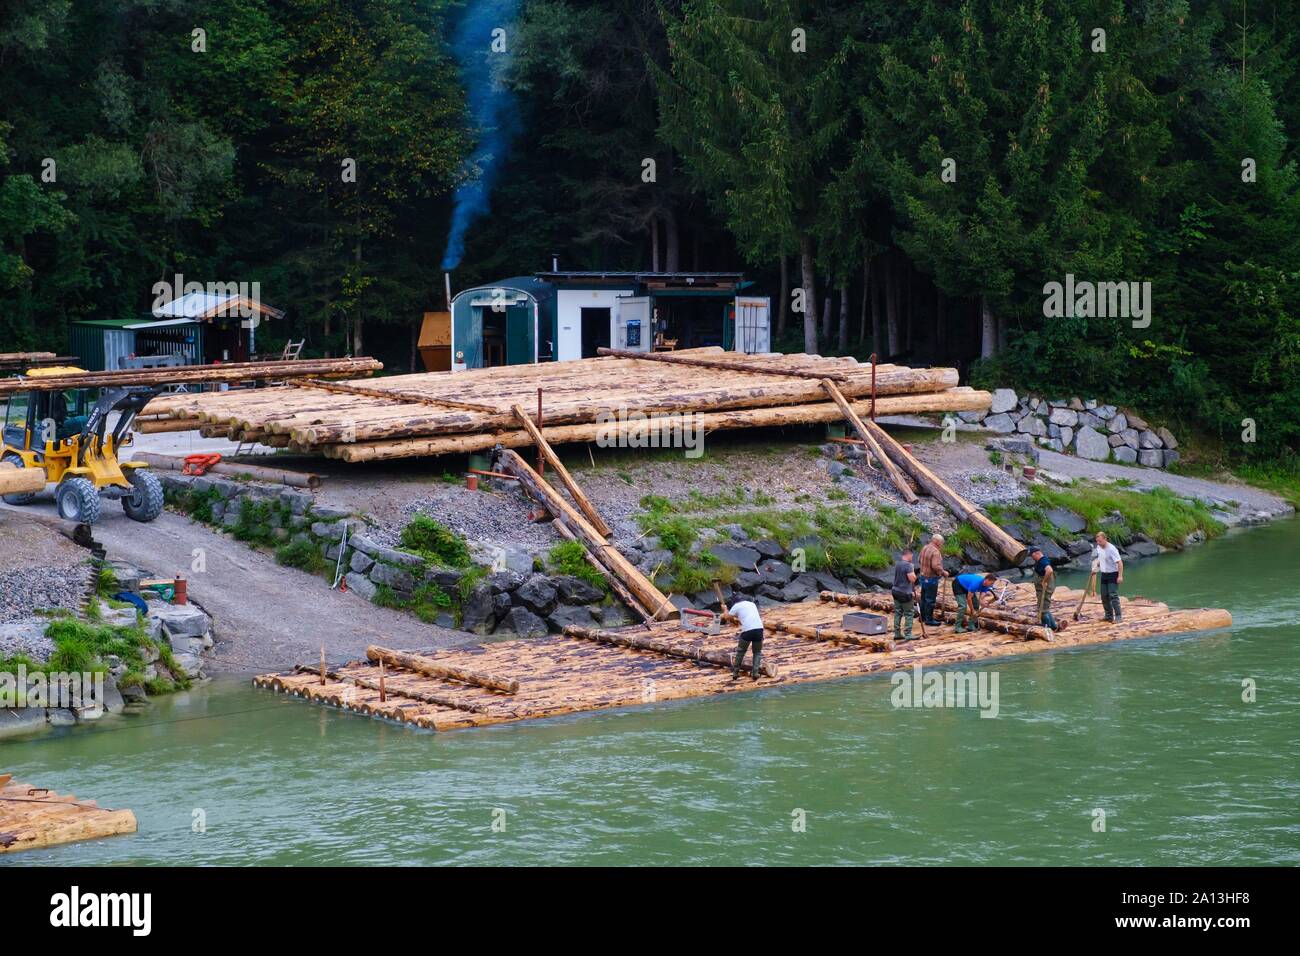 Assembly of rafts on the Isar near Wolfratshausen early in the morning, Upper Bavaria, Bavaria, Germany Stock Photo